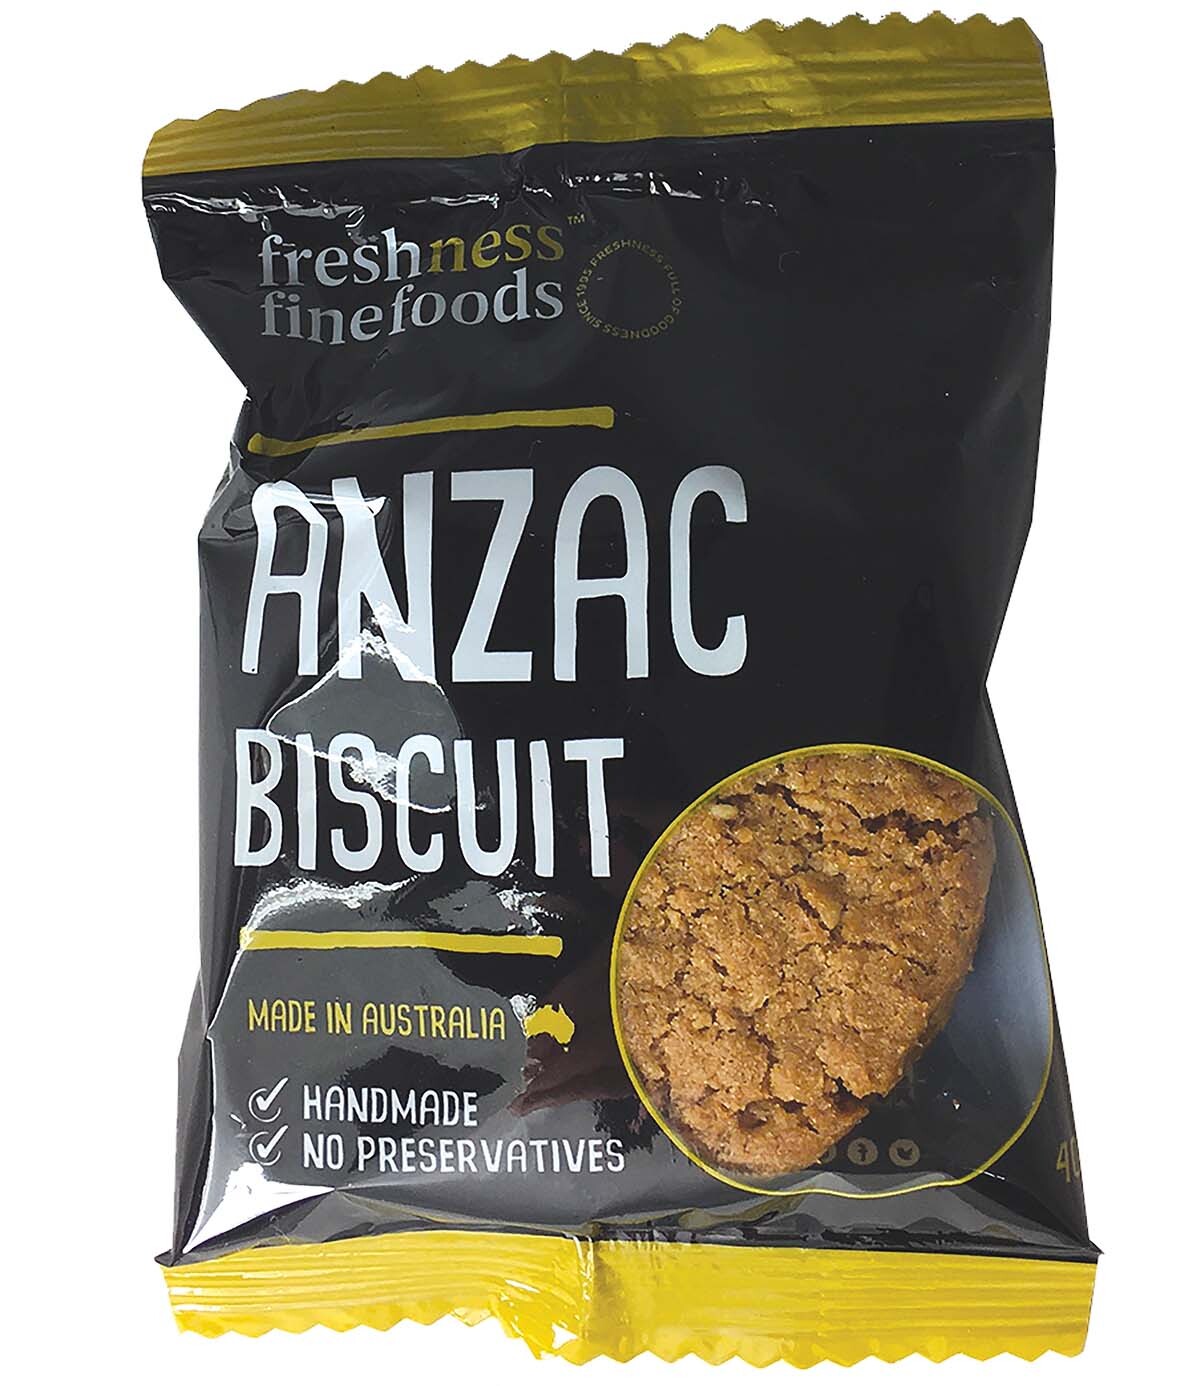 Individually Wrapped Biscuit Anzac Biscuit 40g - Box of 20